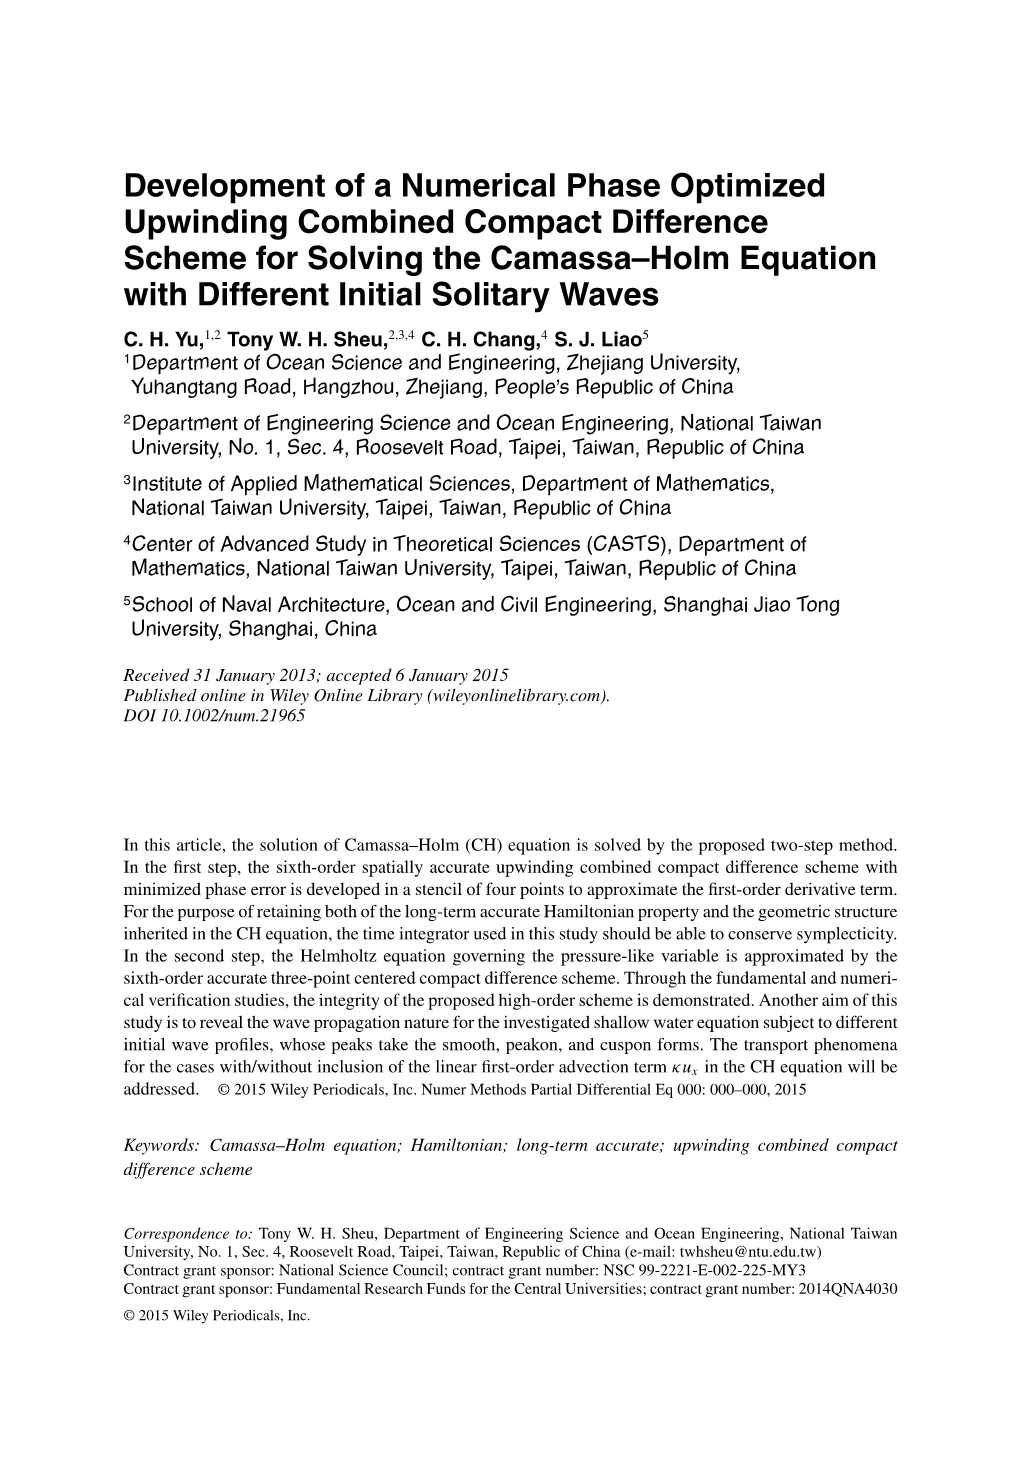 Development of a Numerical Phase Optimized Upwinding Combined Compact Difference Scheme for Solving the Camassa–Holm Equation with Different Initial Solitary Waves C